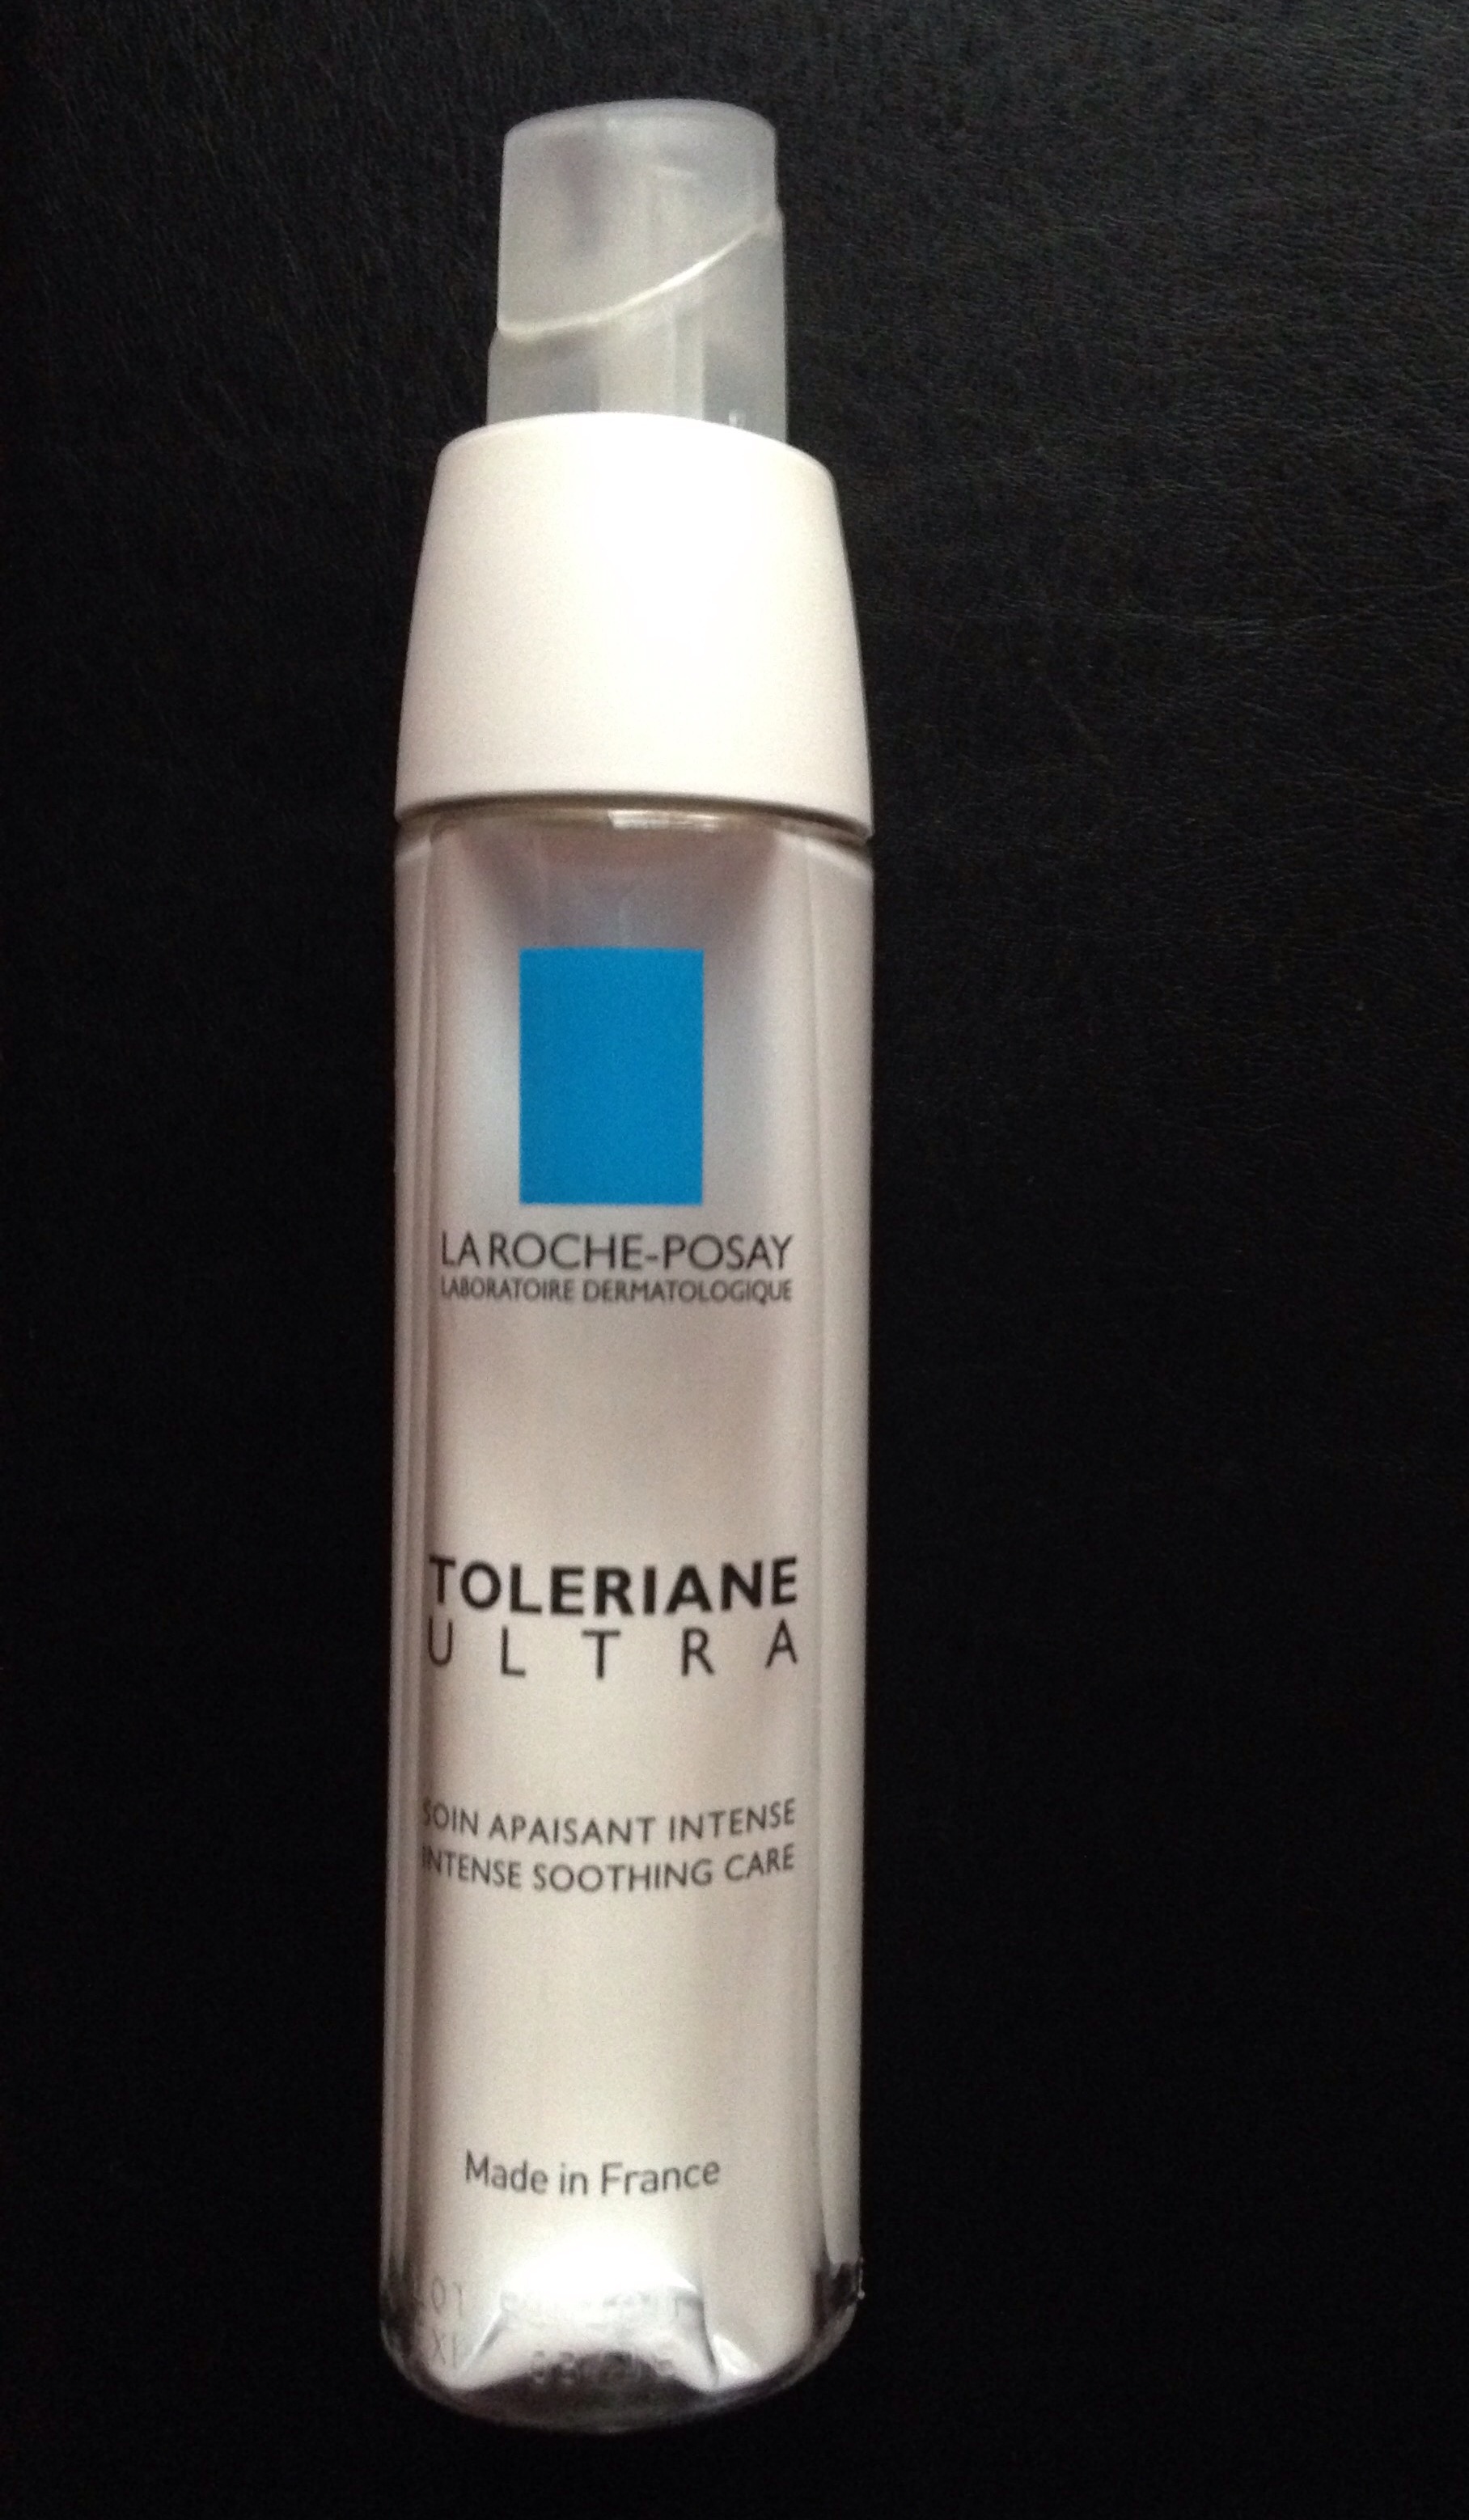 Review of La Roche-Posay Toleriane Ultra Intense Soothing Care –